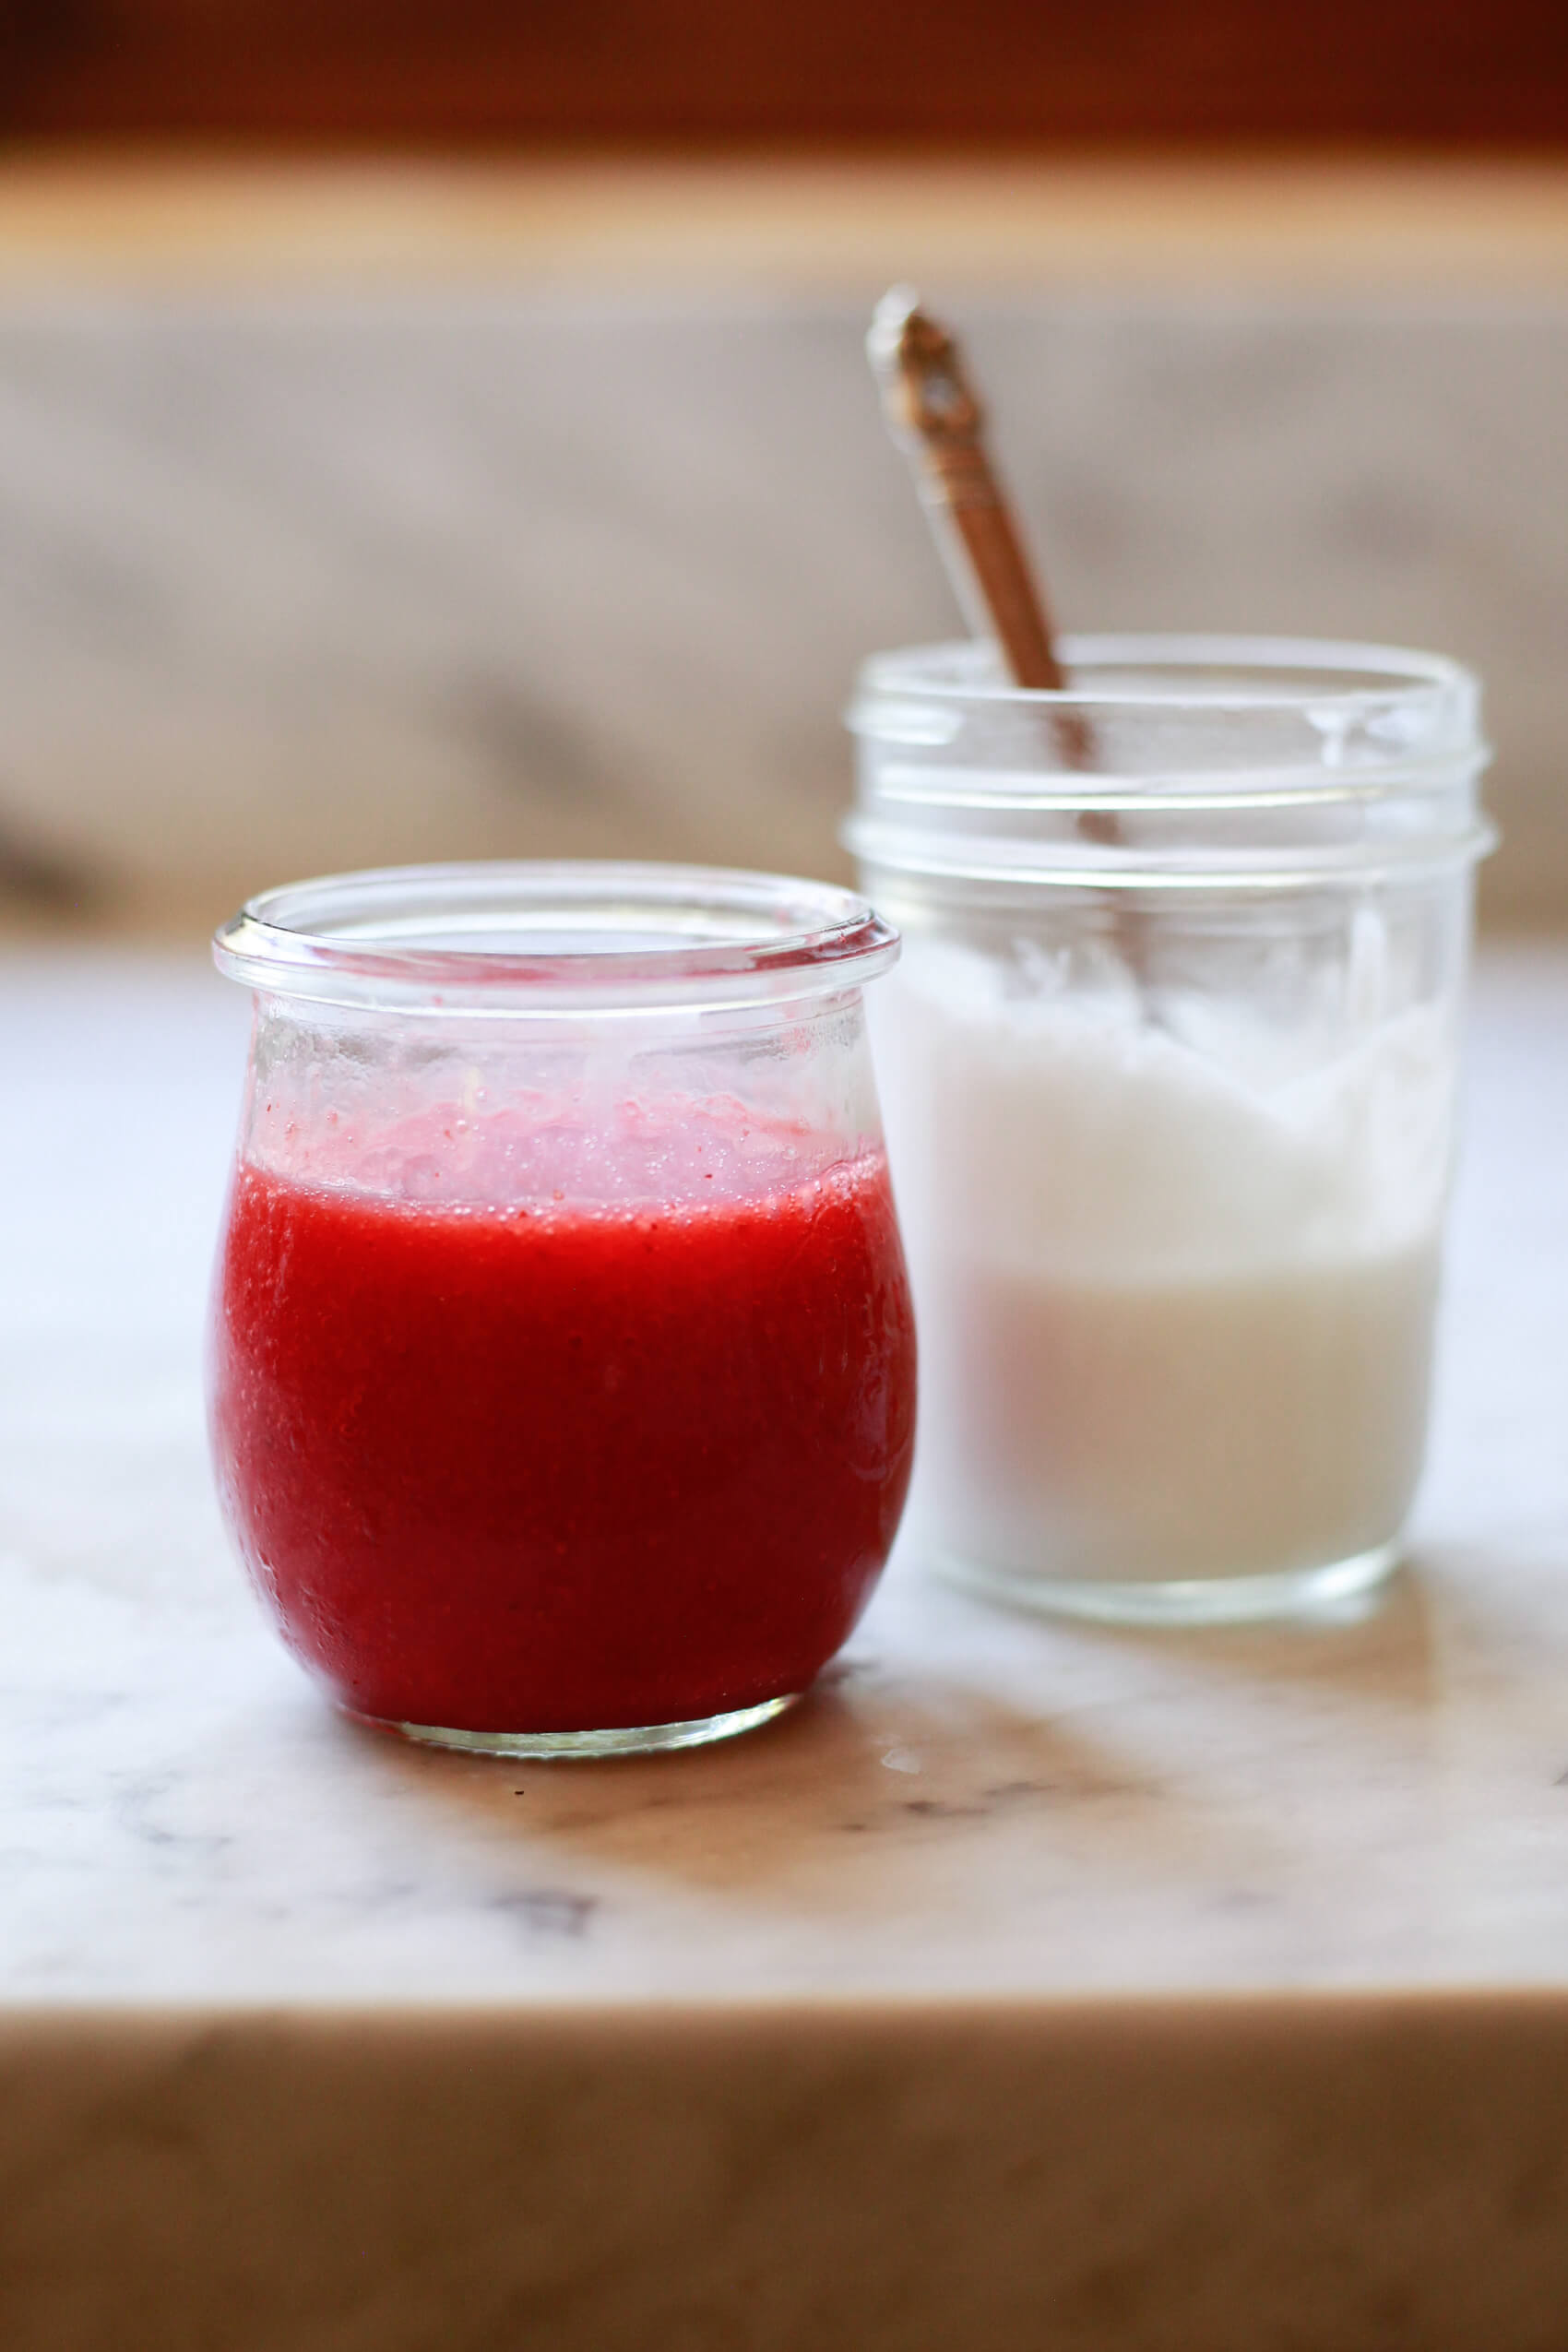 Small jars filled with Zuma Valley coconut cream homemade strawberry glaze sit on a kitchen counter before making a Hailey Bieber smoothie. 